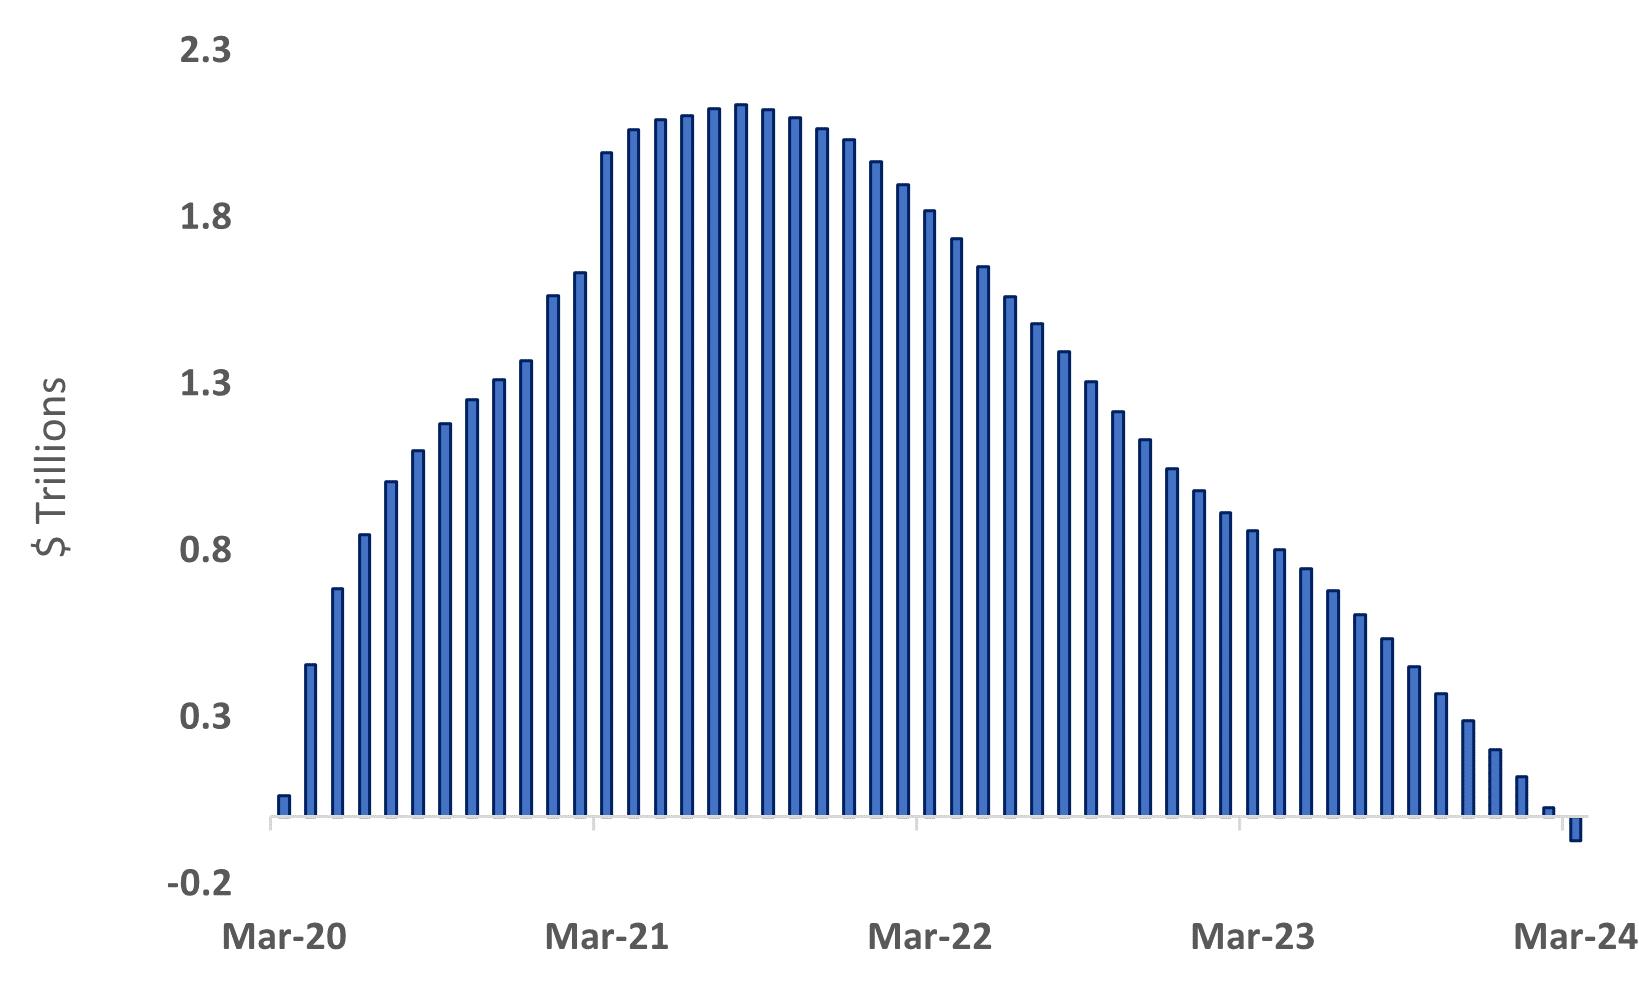 Bar graph of consumer savings from March 2020 to March 2024 in trillions of dollars as described in the preceding paragraph. 